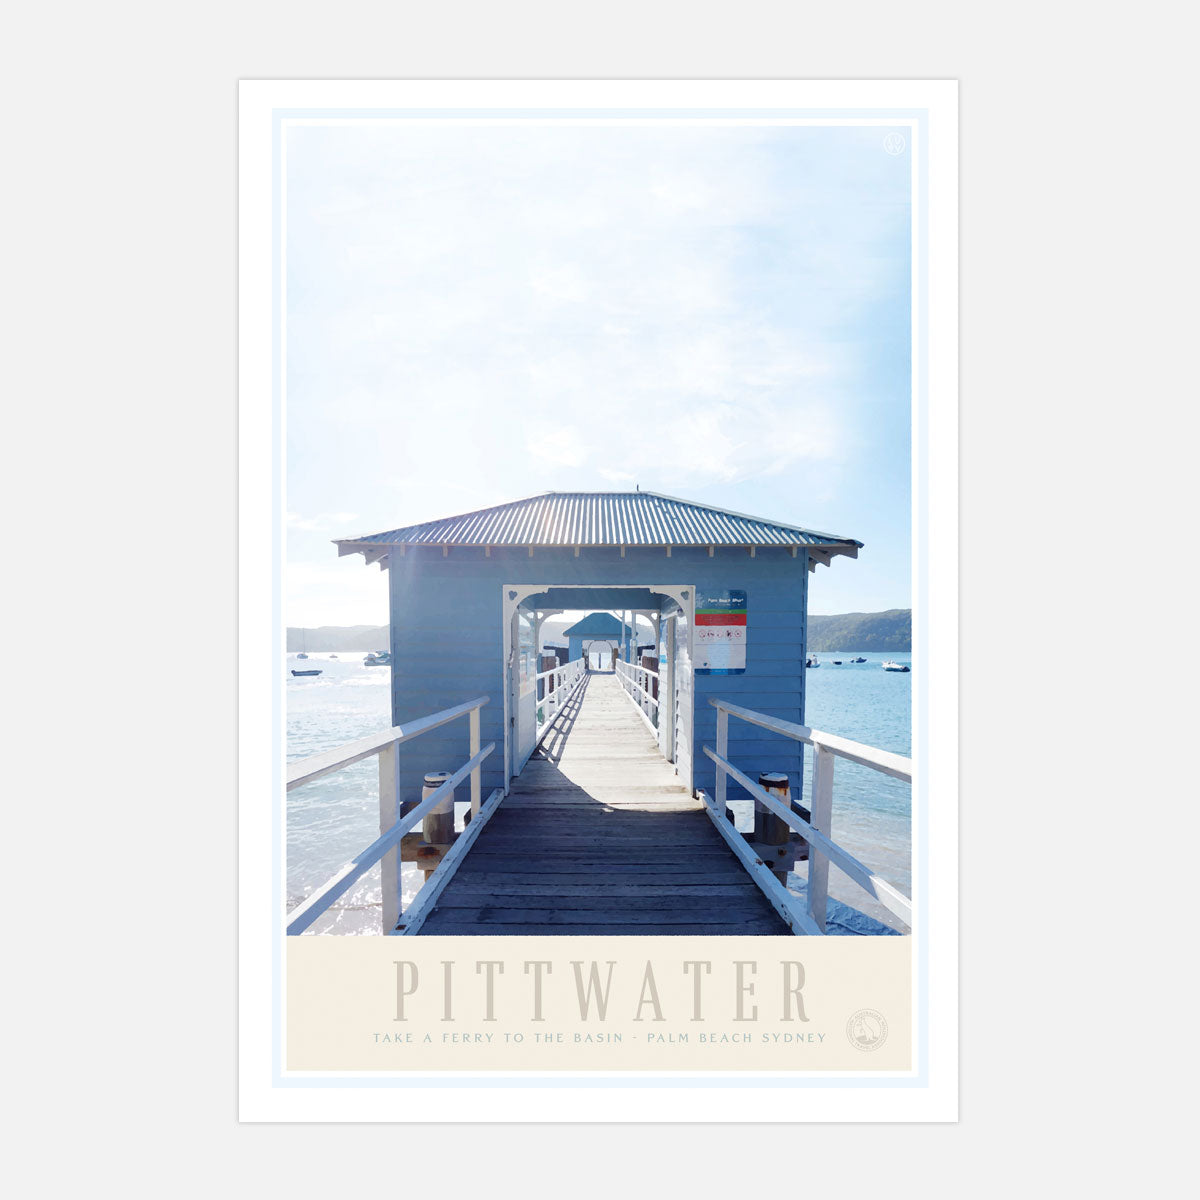 Pittwater Sydney Ferry print. Vintage retro travel posterfrom Places We Luv